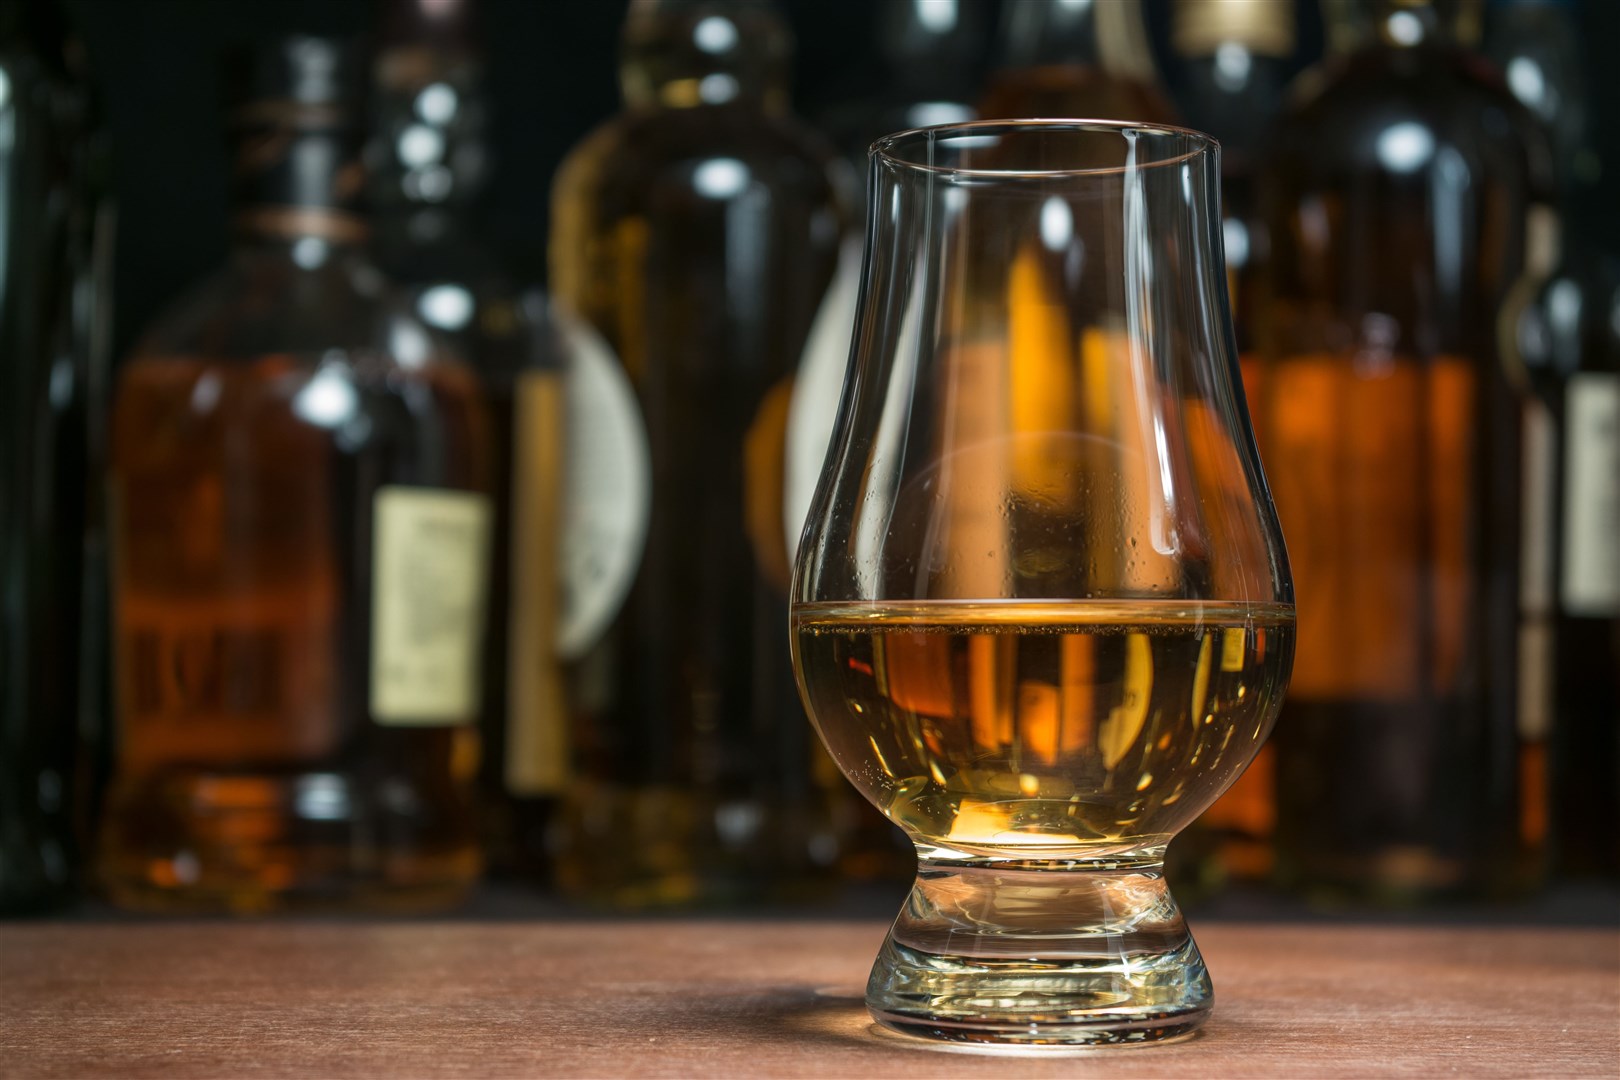 Unions have announced a wave of strike action at Diageo sites across Scotland.